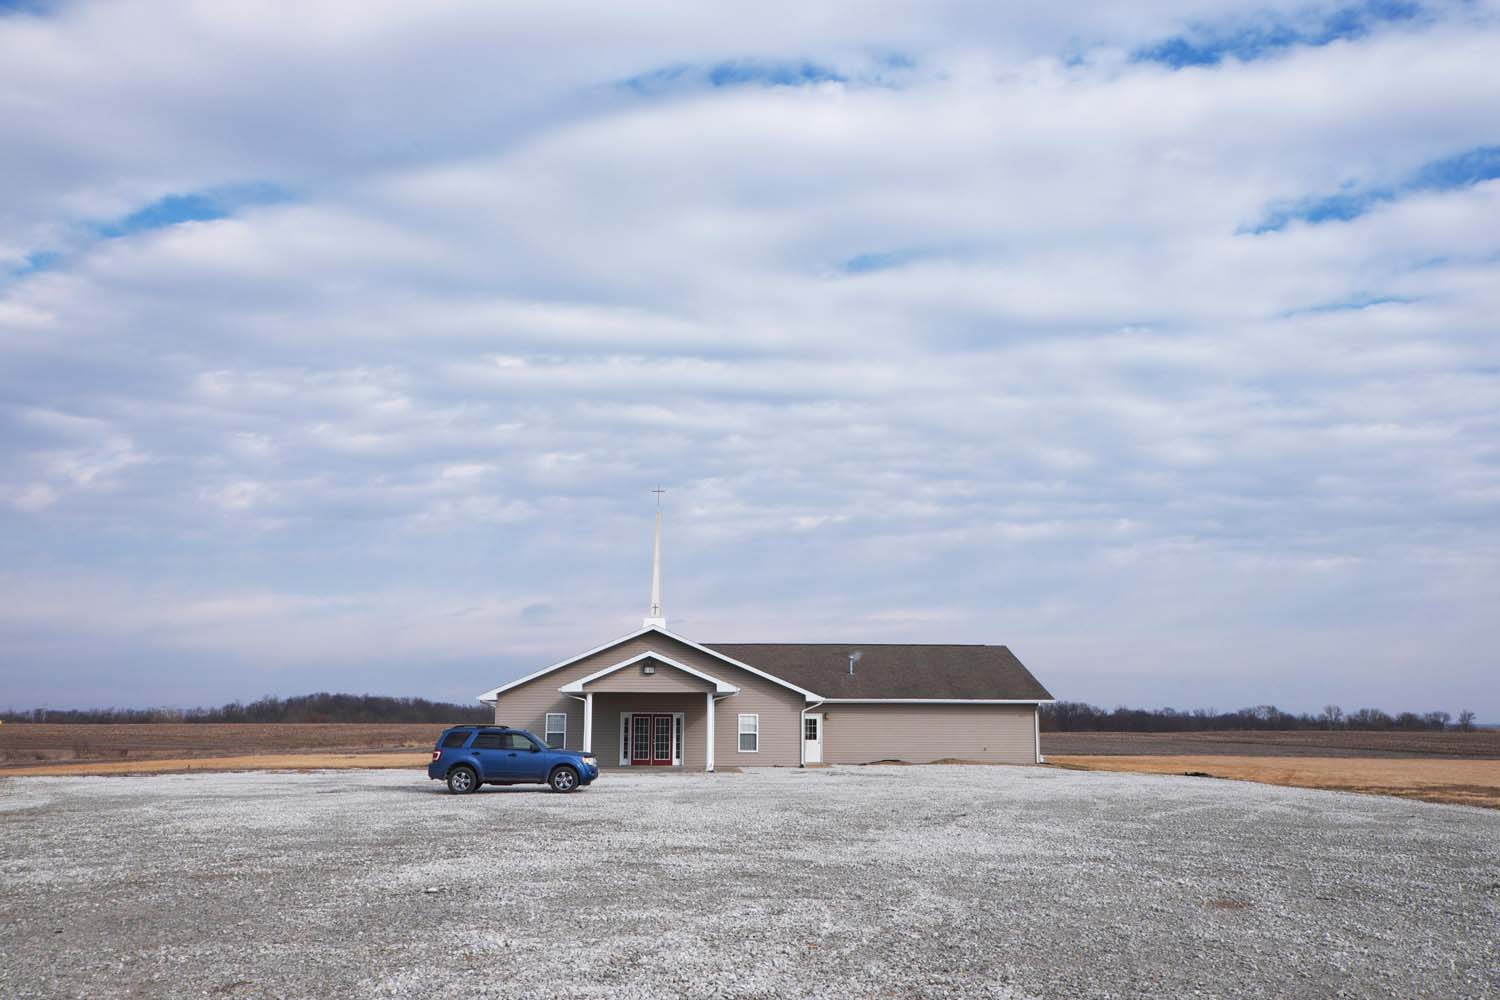  Small church with large parking lot. Plymouth IL February, 2016 